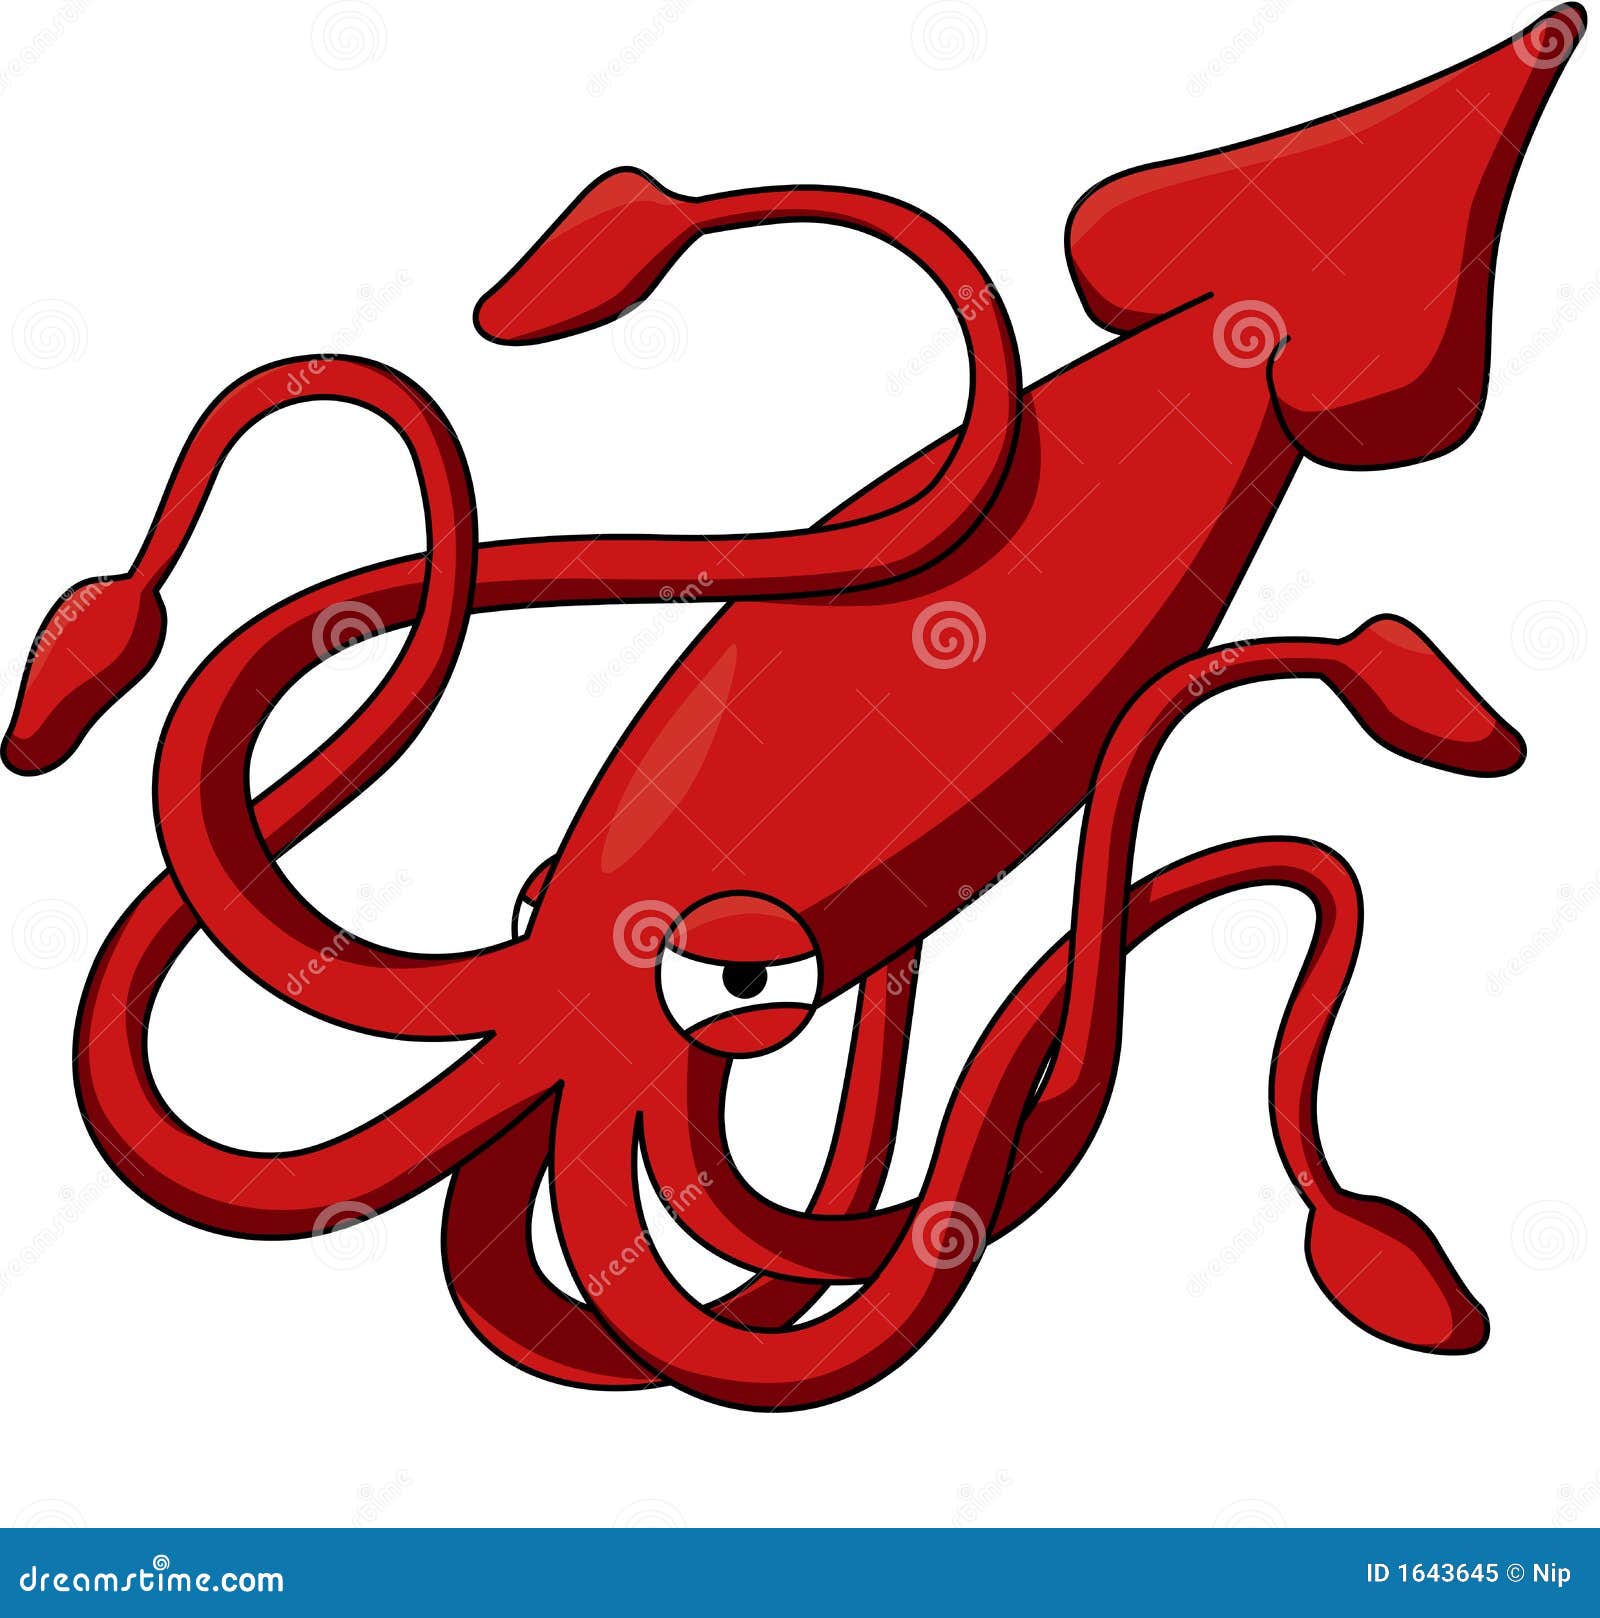 stock vector. Illustration of fish, tentacle - 1643645